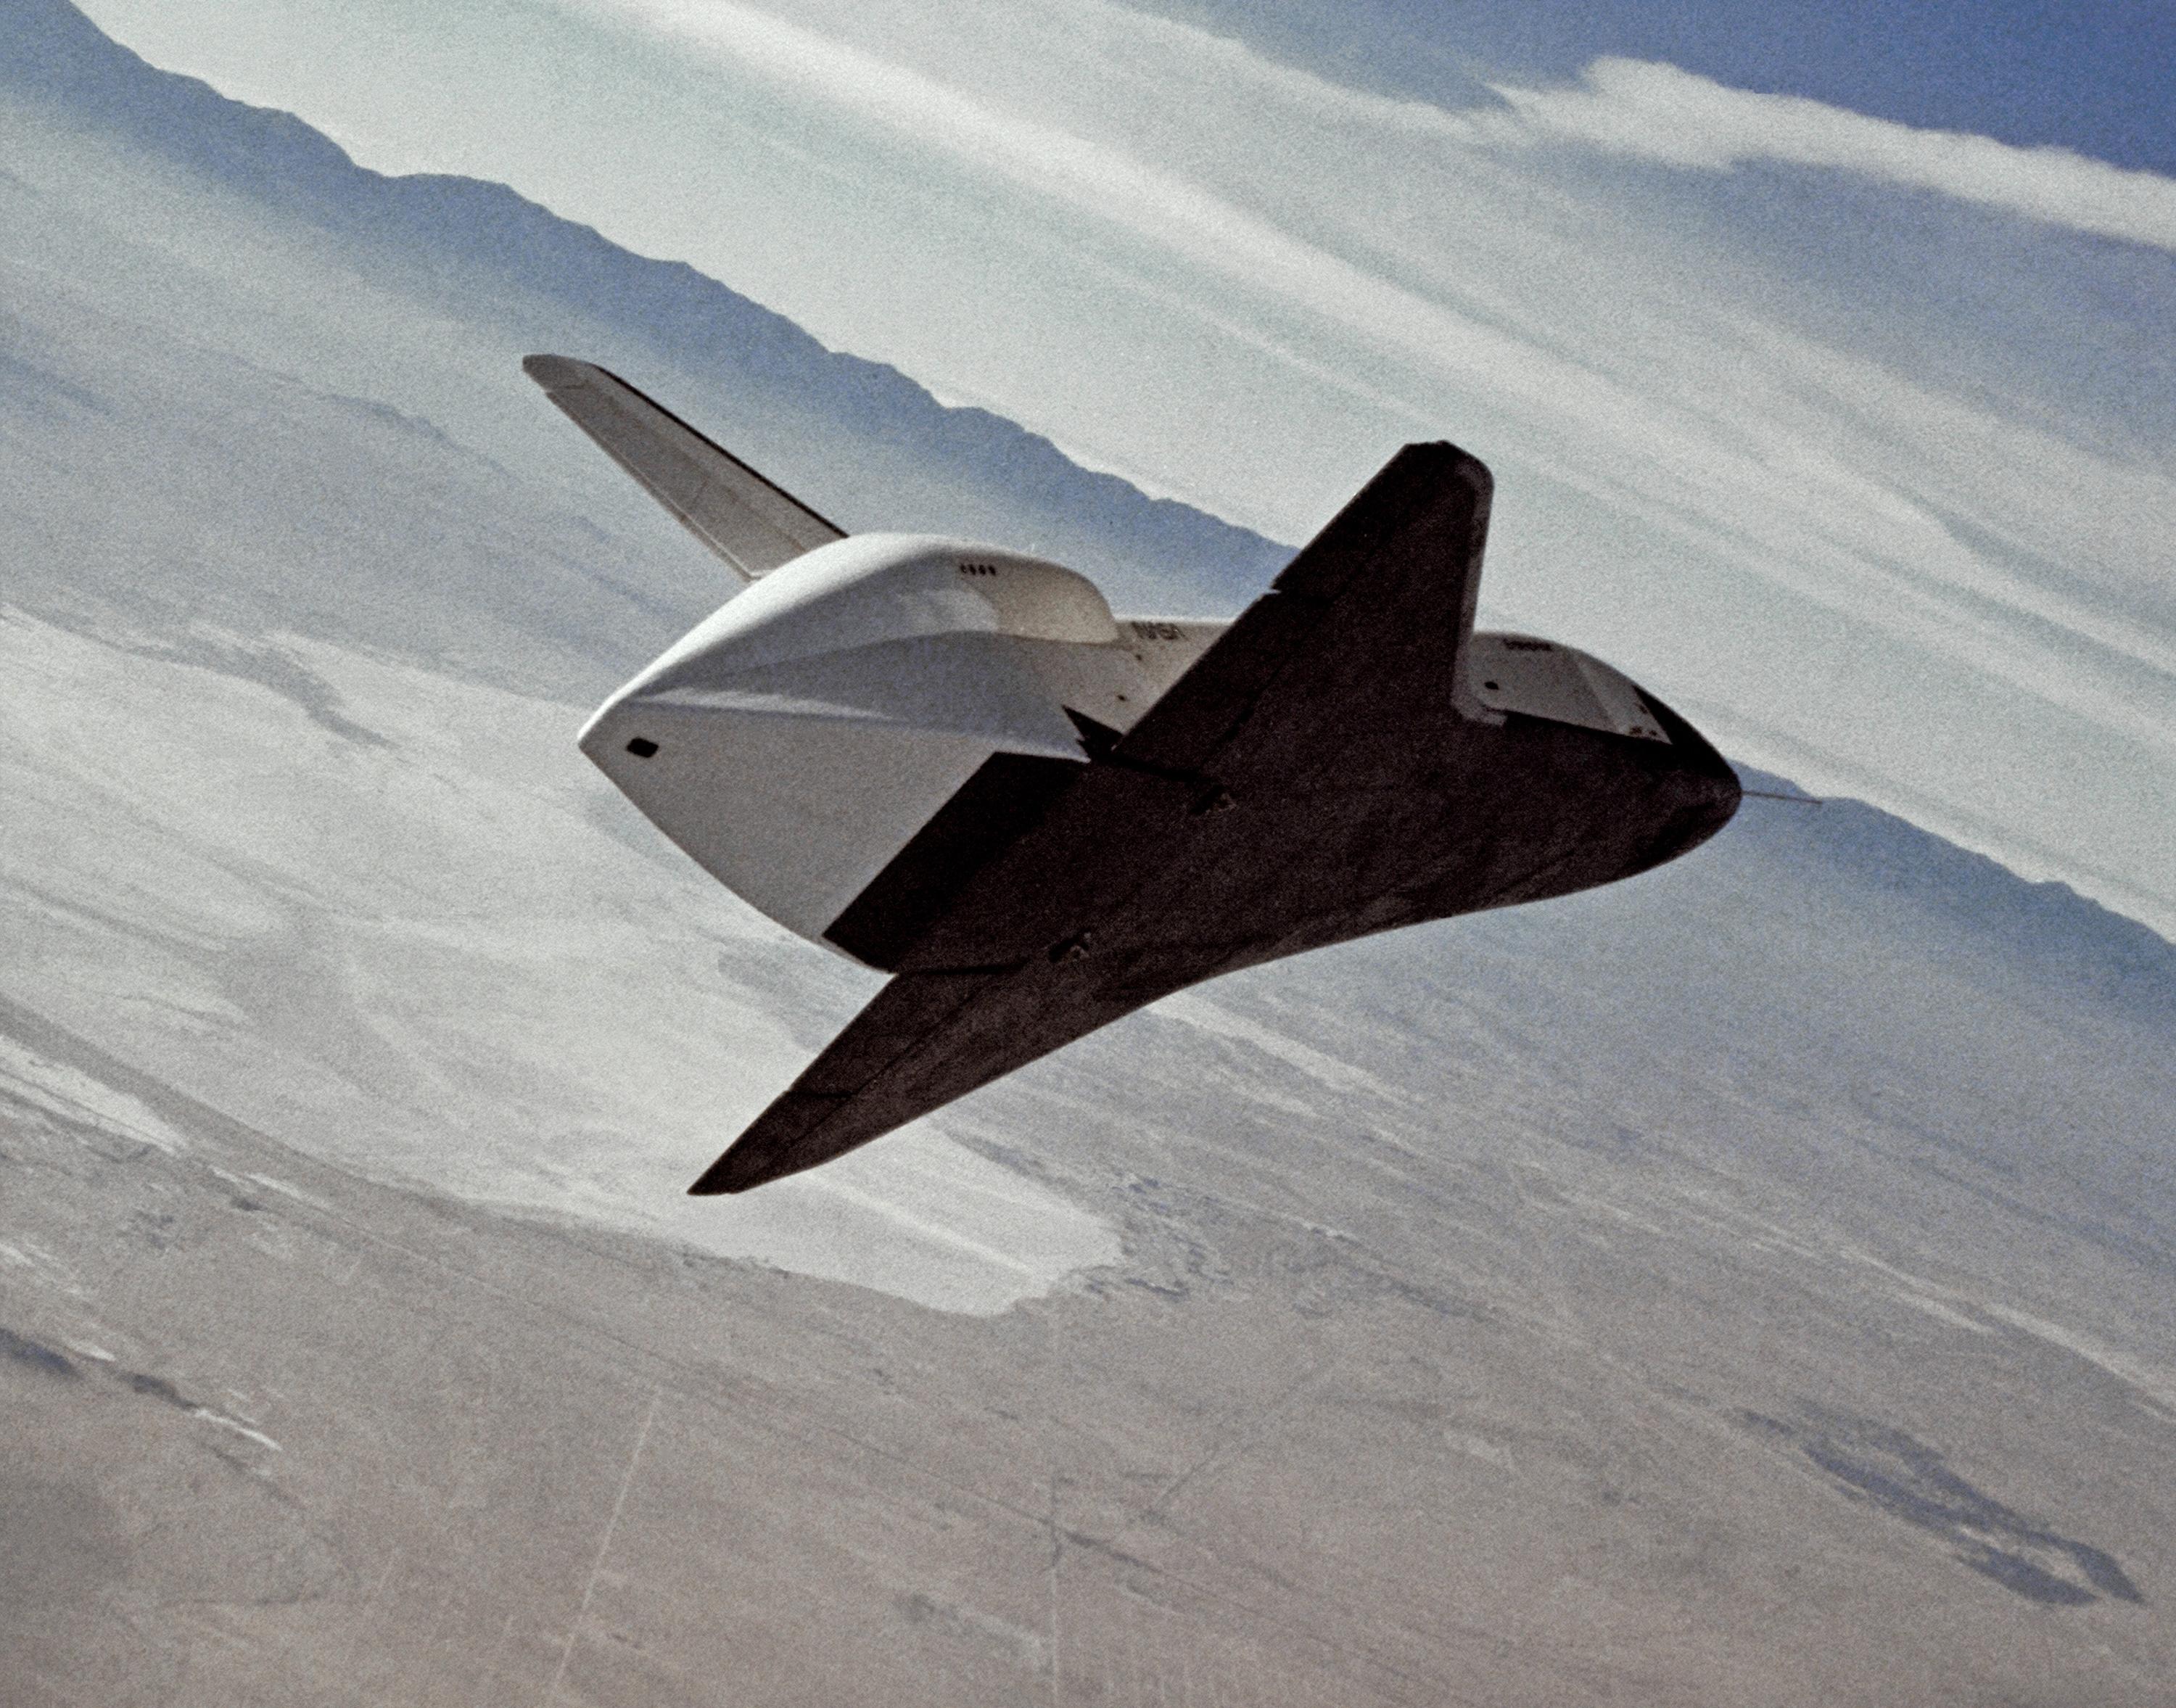 Space Shuttle Enterprise banks to the left to line up with the runway on Rogers Dry Lake. (NASA)